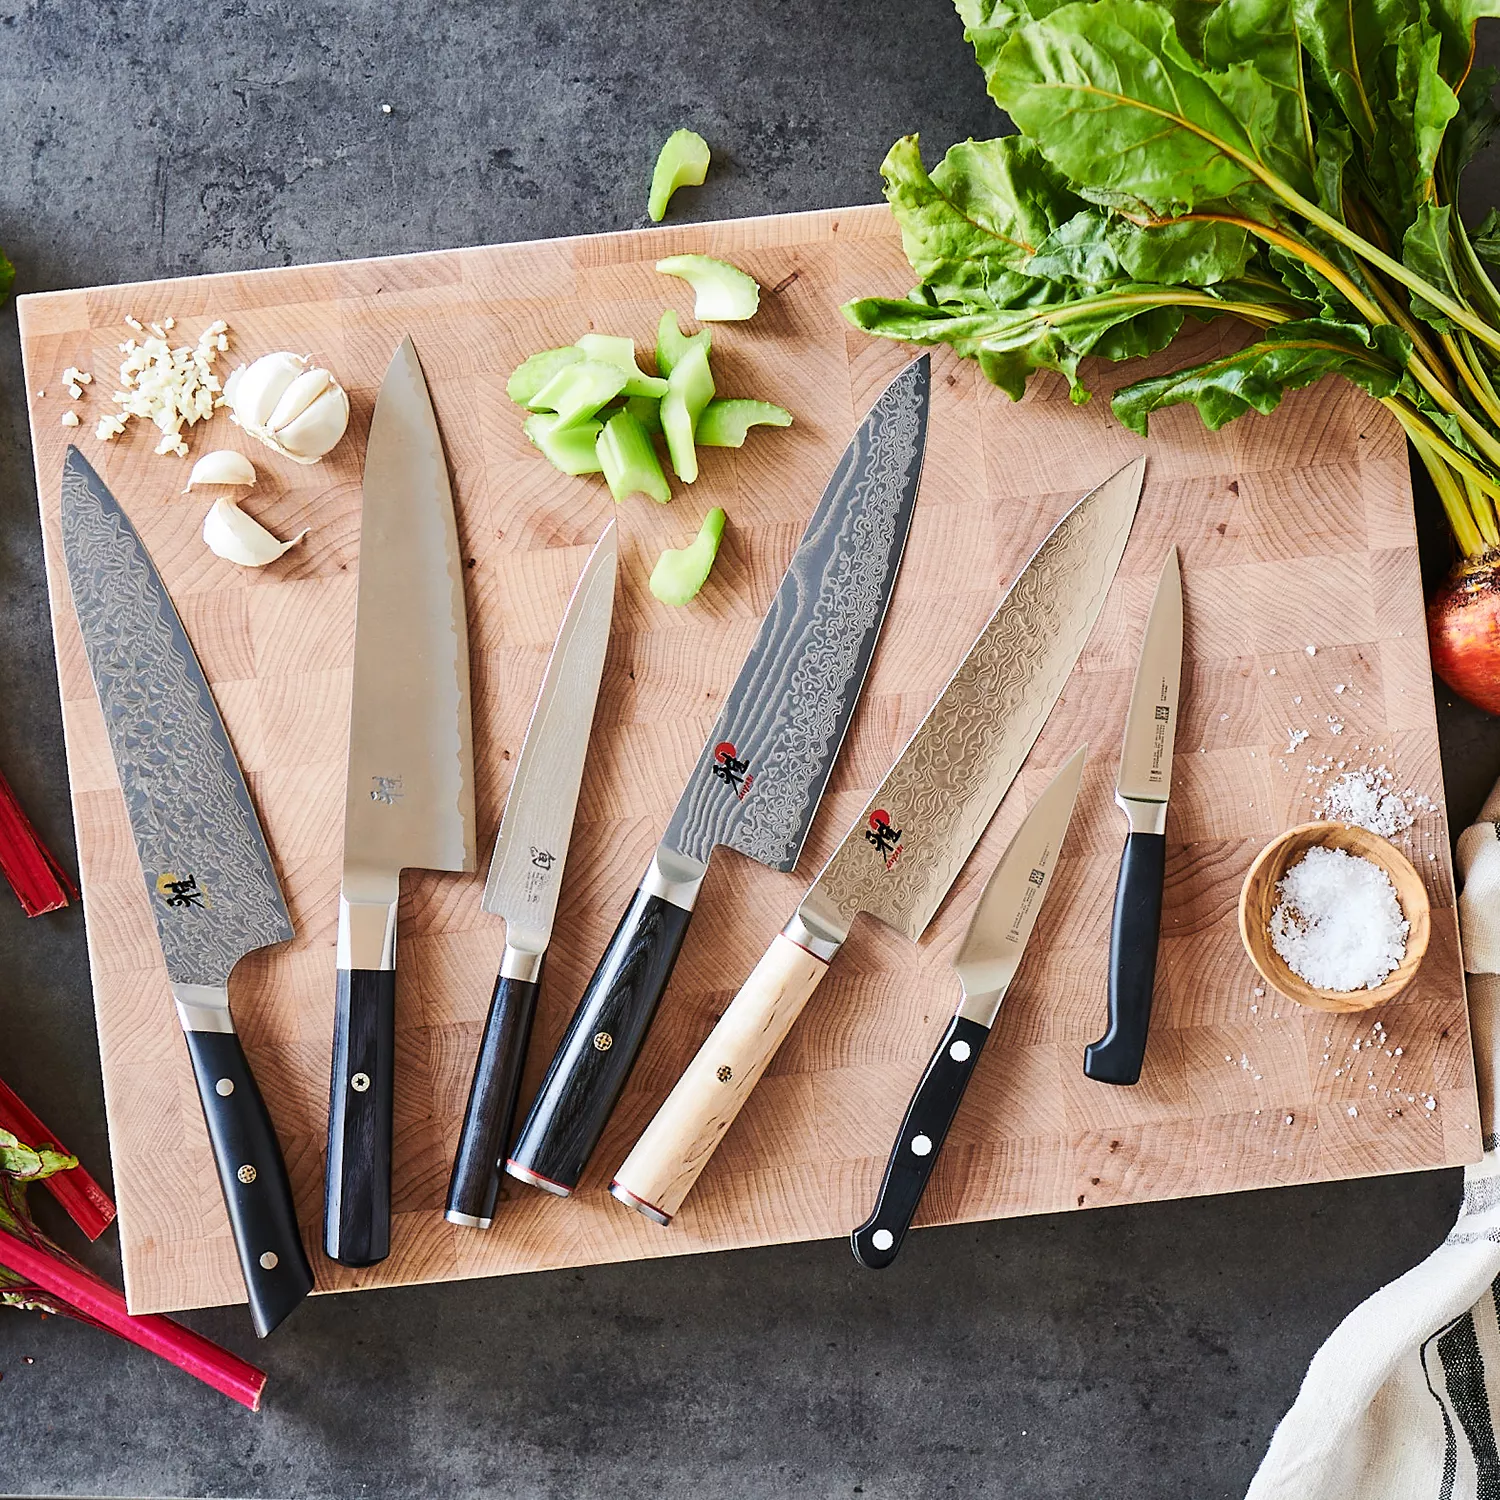 Feel like a master chef in the kitchen with this Japanese knife set